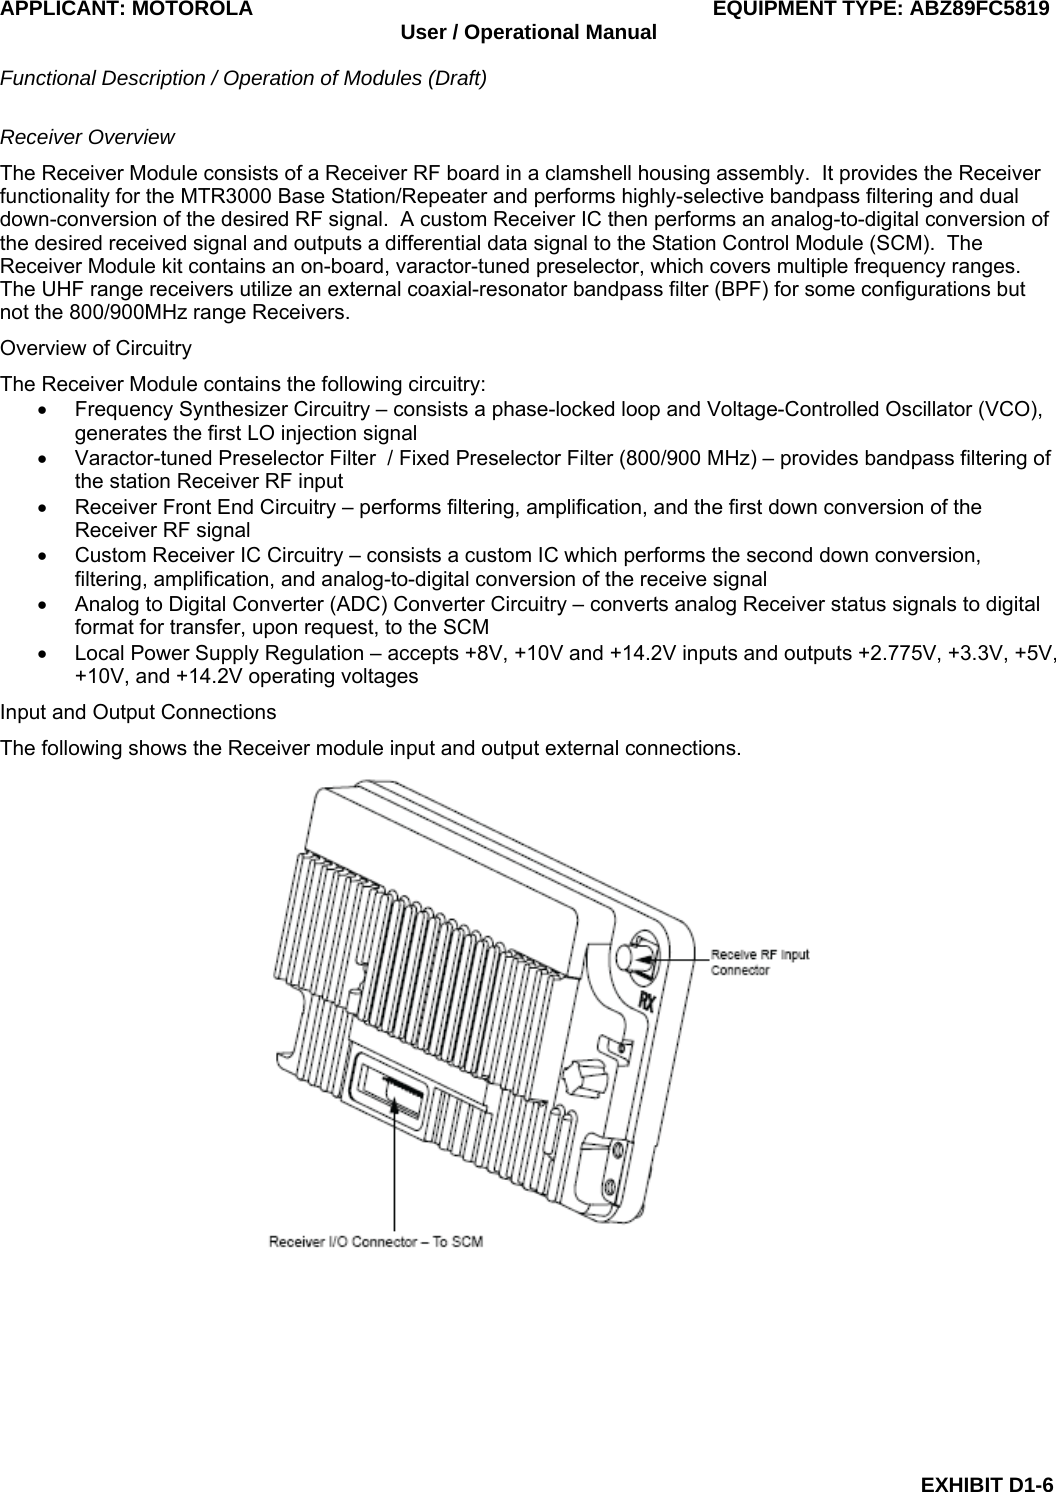 APPLICANT: MOTOROLA  EQUIPMENT TYPE: ABZ89FC5819 User / Operational Manual  Functional Description / Operation of Modules (Draft)  EXHIBIT D1-6 Receiver Overview The Receiver Module consists of a Receiver RF board in a clamshell housing assembly.  It provides the Receiver functionality for the MTR3000 Base Station/Repeater and performs highly-selective bandpass filtering and dual down-conversion of the desired RF signal.  A custom Receiver IC then performs an analog-to-digital conversion of the desired received signal and outputs a differential data signal to the Station Control Module (SCM).  The Receiver Module kit contains an on-board, varactor-tuned preselector, which covers multiple frequency ranges. The UHF range receivers utilize an external coaxial-resonator bandpass filter (BPF) for some configurations but not the 800/900MHz range Receivers. Overview of Circuitry The Receiver Module contains the following circuitry: •  Frequency Synthesizer Circuitry – consists a phase-locked loop and Voltage-Controlled Oscillator (VCO), generates the first LO injection signal •  Varactor-tuned Preselector Filter  / Fixed Preselector Filter (800/900 MHz) – provides bandpass filtering of the station Receiver RF input •  Receiver Front End Circuitry – performs filtering, amplification, and the first down conversion of the Receiver RF signal •  Custom Receiver IC Circuitry – consists a custom IC which performs the second down conversion, filtering, amplification, and analog-to-digital conversion of the receive signal •  Analog to Digital Converter (ADC) Converter Circuitry – converts analog Receiver status signals to digital format for transfer, upon request, to the SCM •  Local Power Supply Regulation – accepts +8V, +10V and +14.2V inputs and outputs +2.775V, +3.3V, +5V, +10V, and +14.2V operating voltages Input and Output Connections The following shows the Receiver module input and output external connections.  